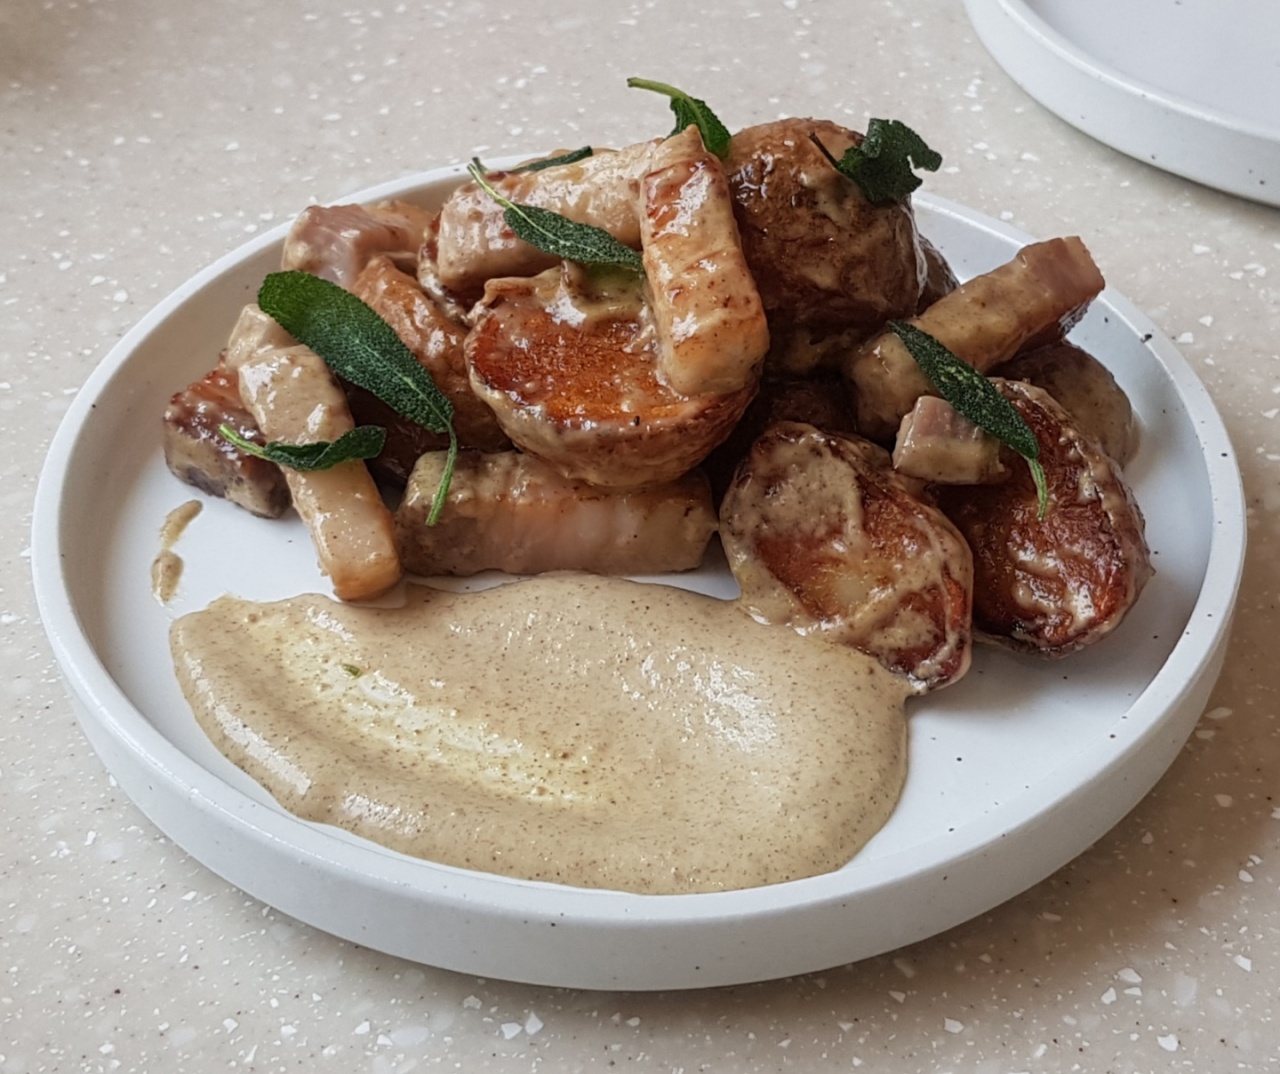 tro Anthro's fried baby potatoes are peppered with house-made bacon, fired sage and an aioli-based sauce. (Jean Oh / The Korean Herald)